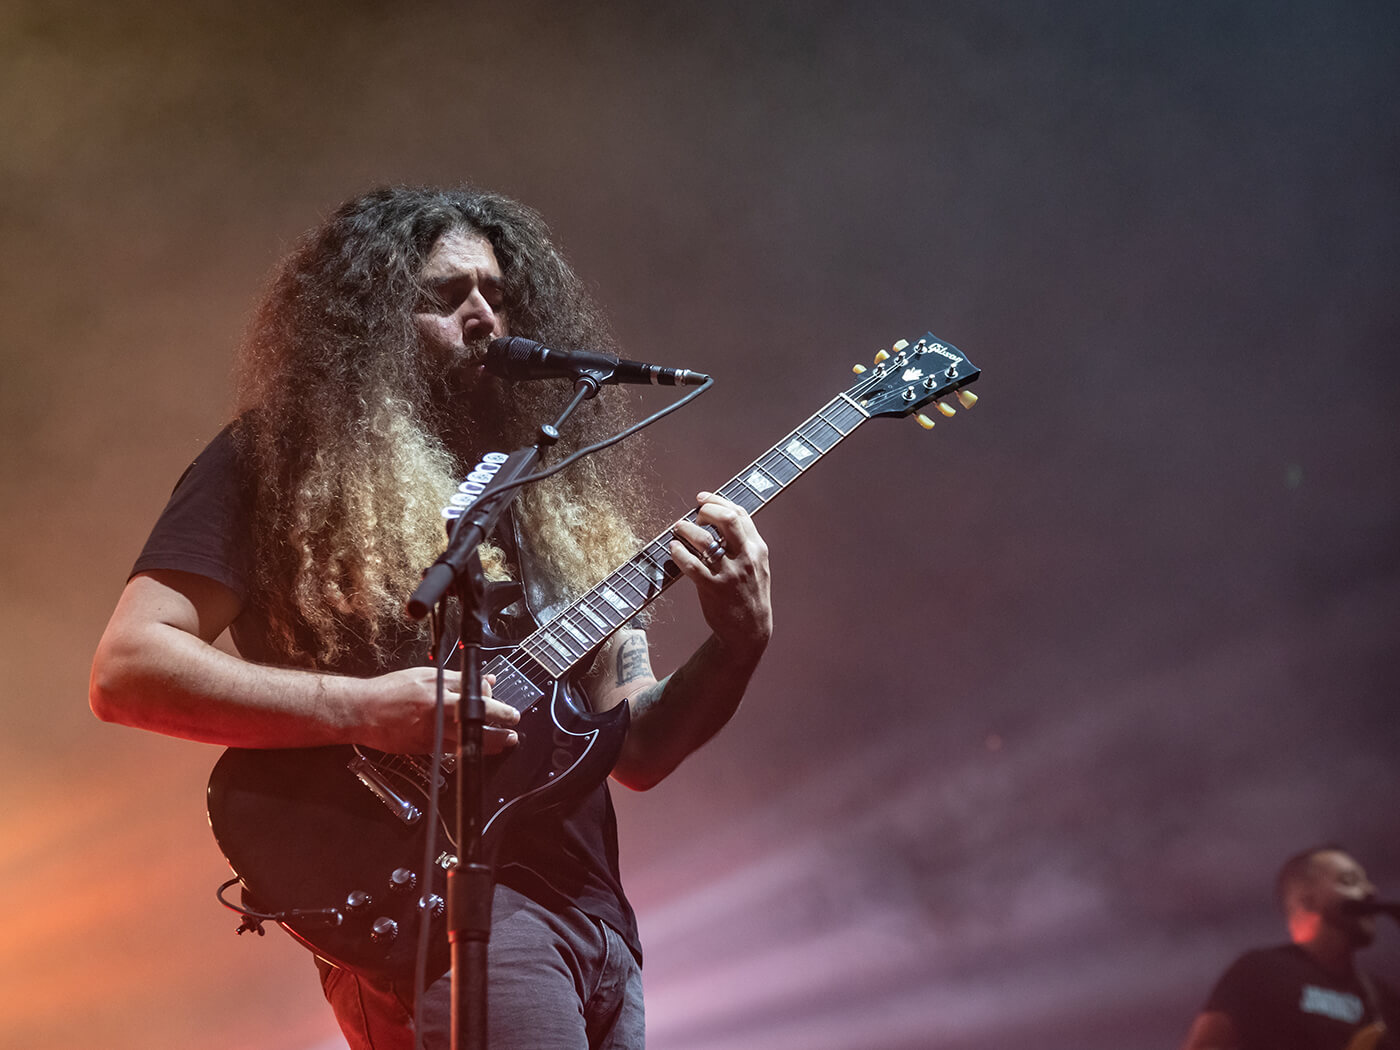 Claudio Sanchez of Coheed and Cambria performing on stage at The Masonic.